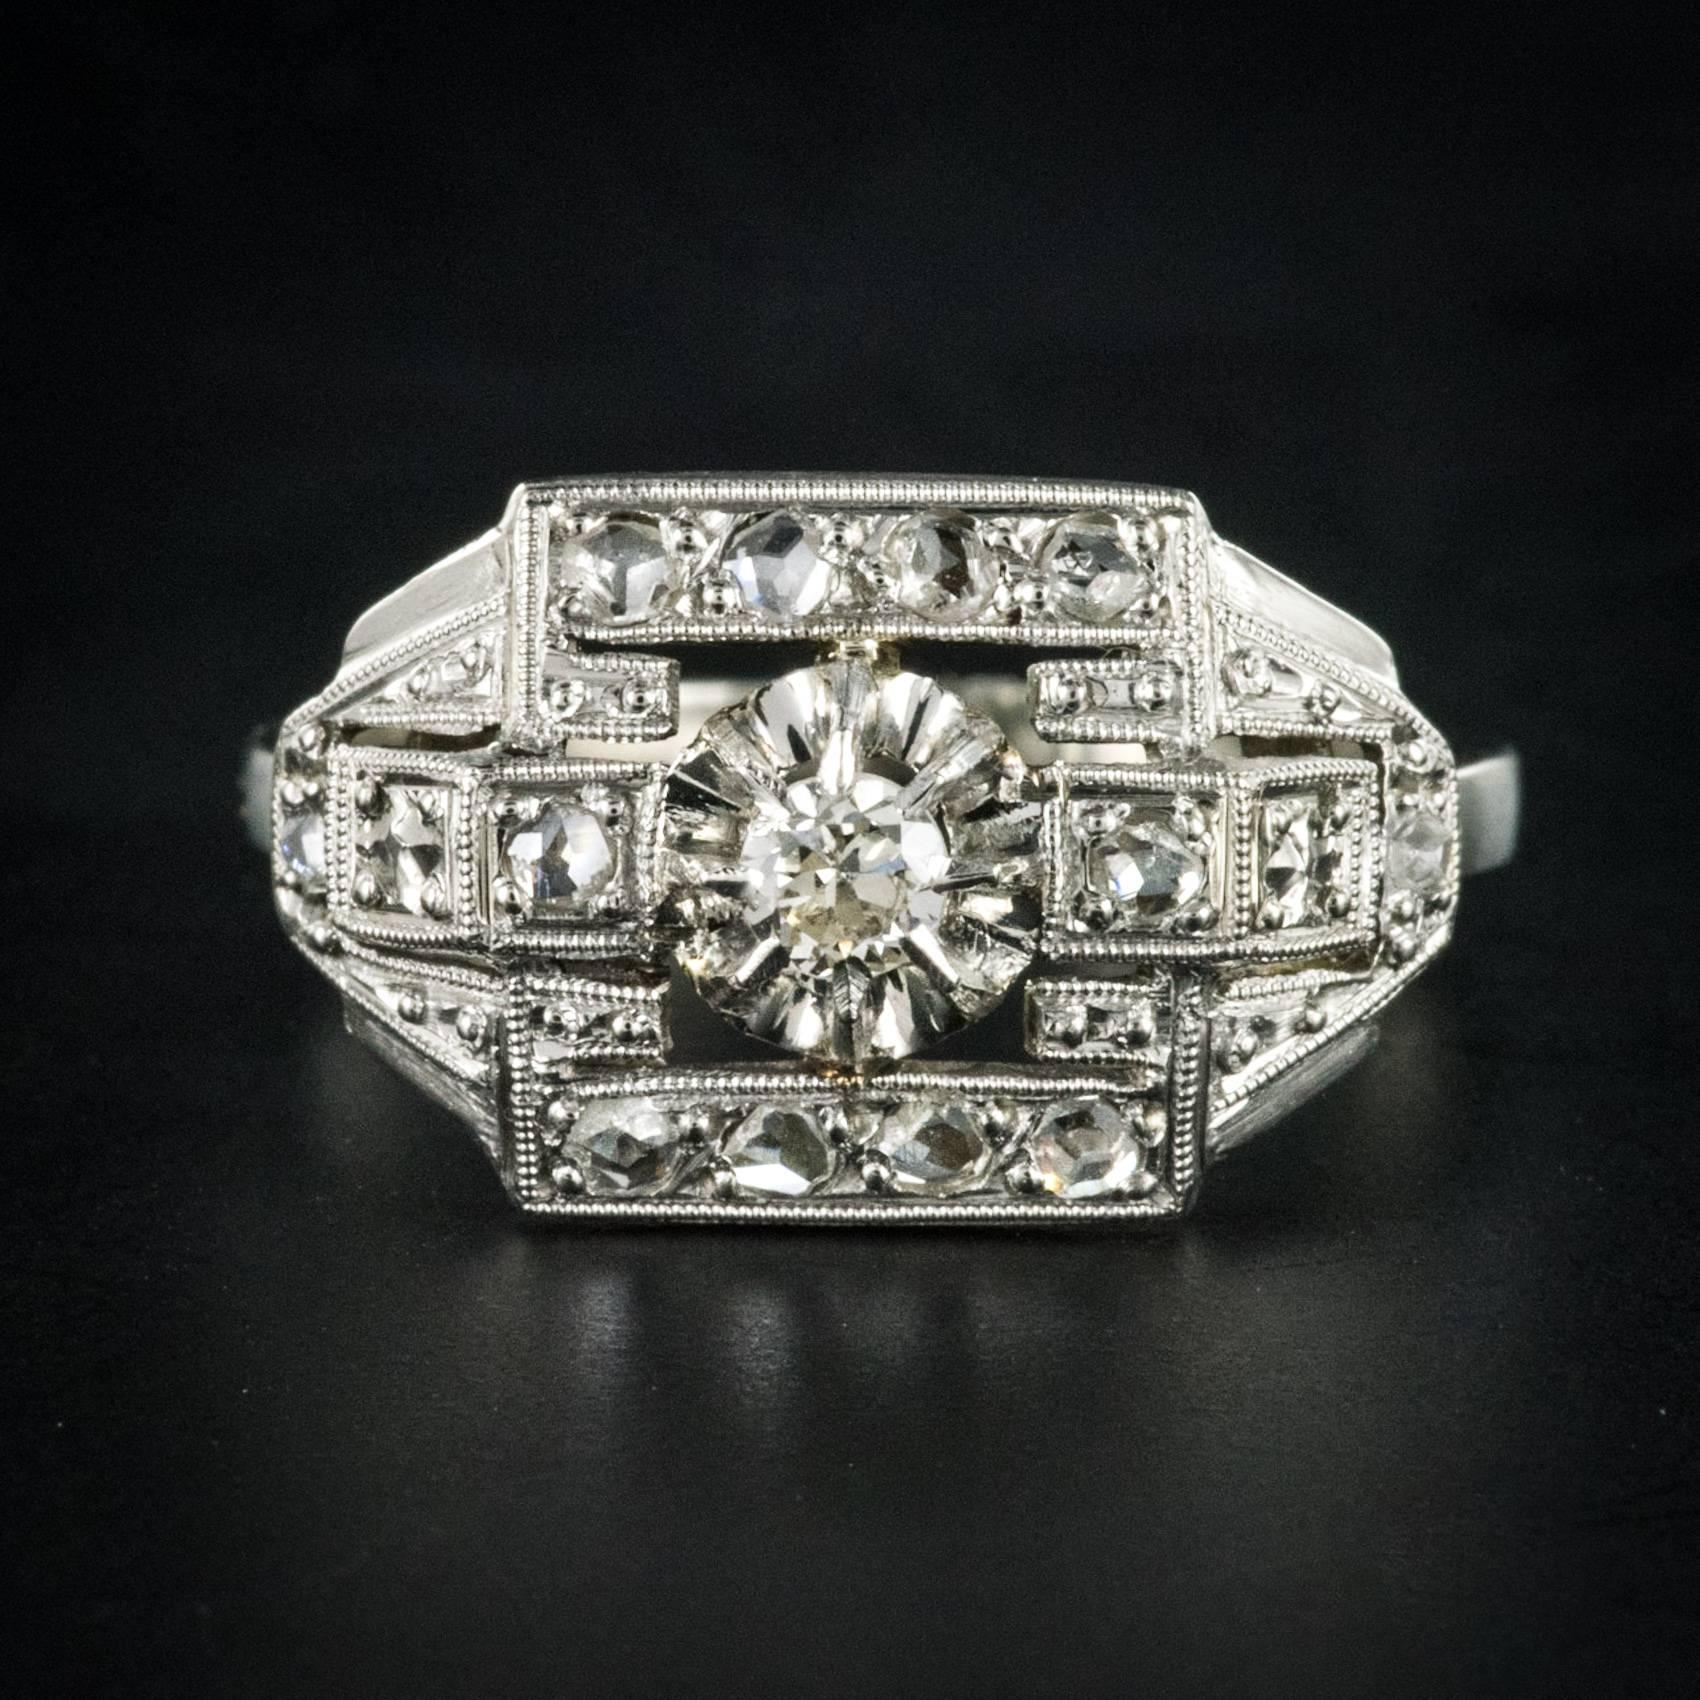 Ring in 18 karats white gold, eagle's head hallmark, and platinum dog's head hallmark.
French Art Deco ring, it is set with claws of a brilliant-cut diamond on a geometric openwork and set with rose-cut diamonds.
Weight of the central diamond: 0.12